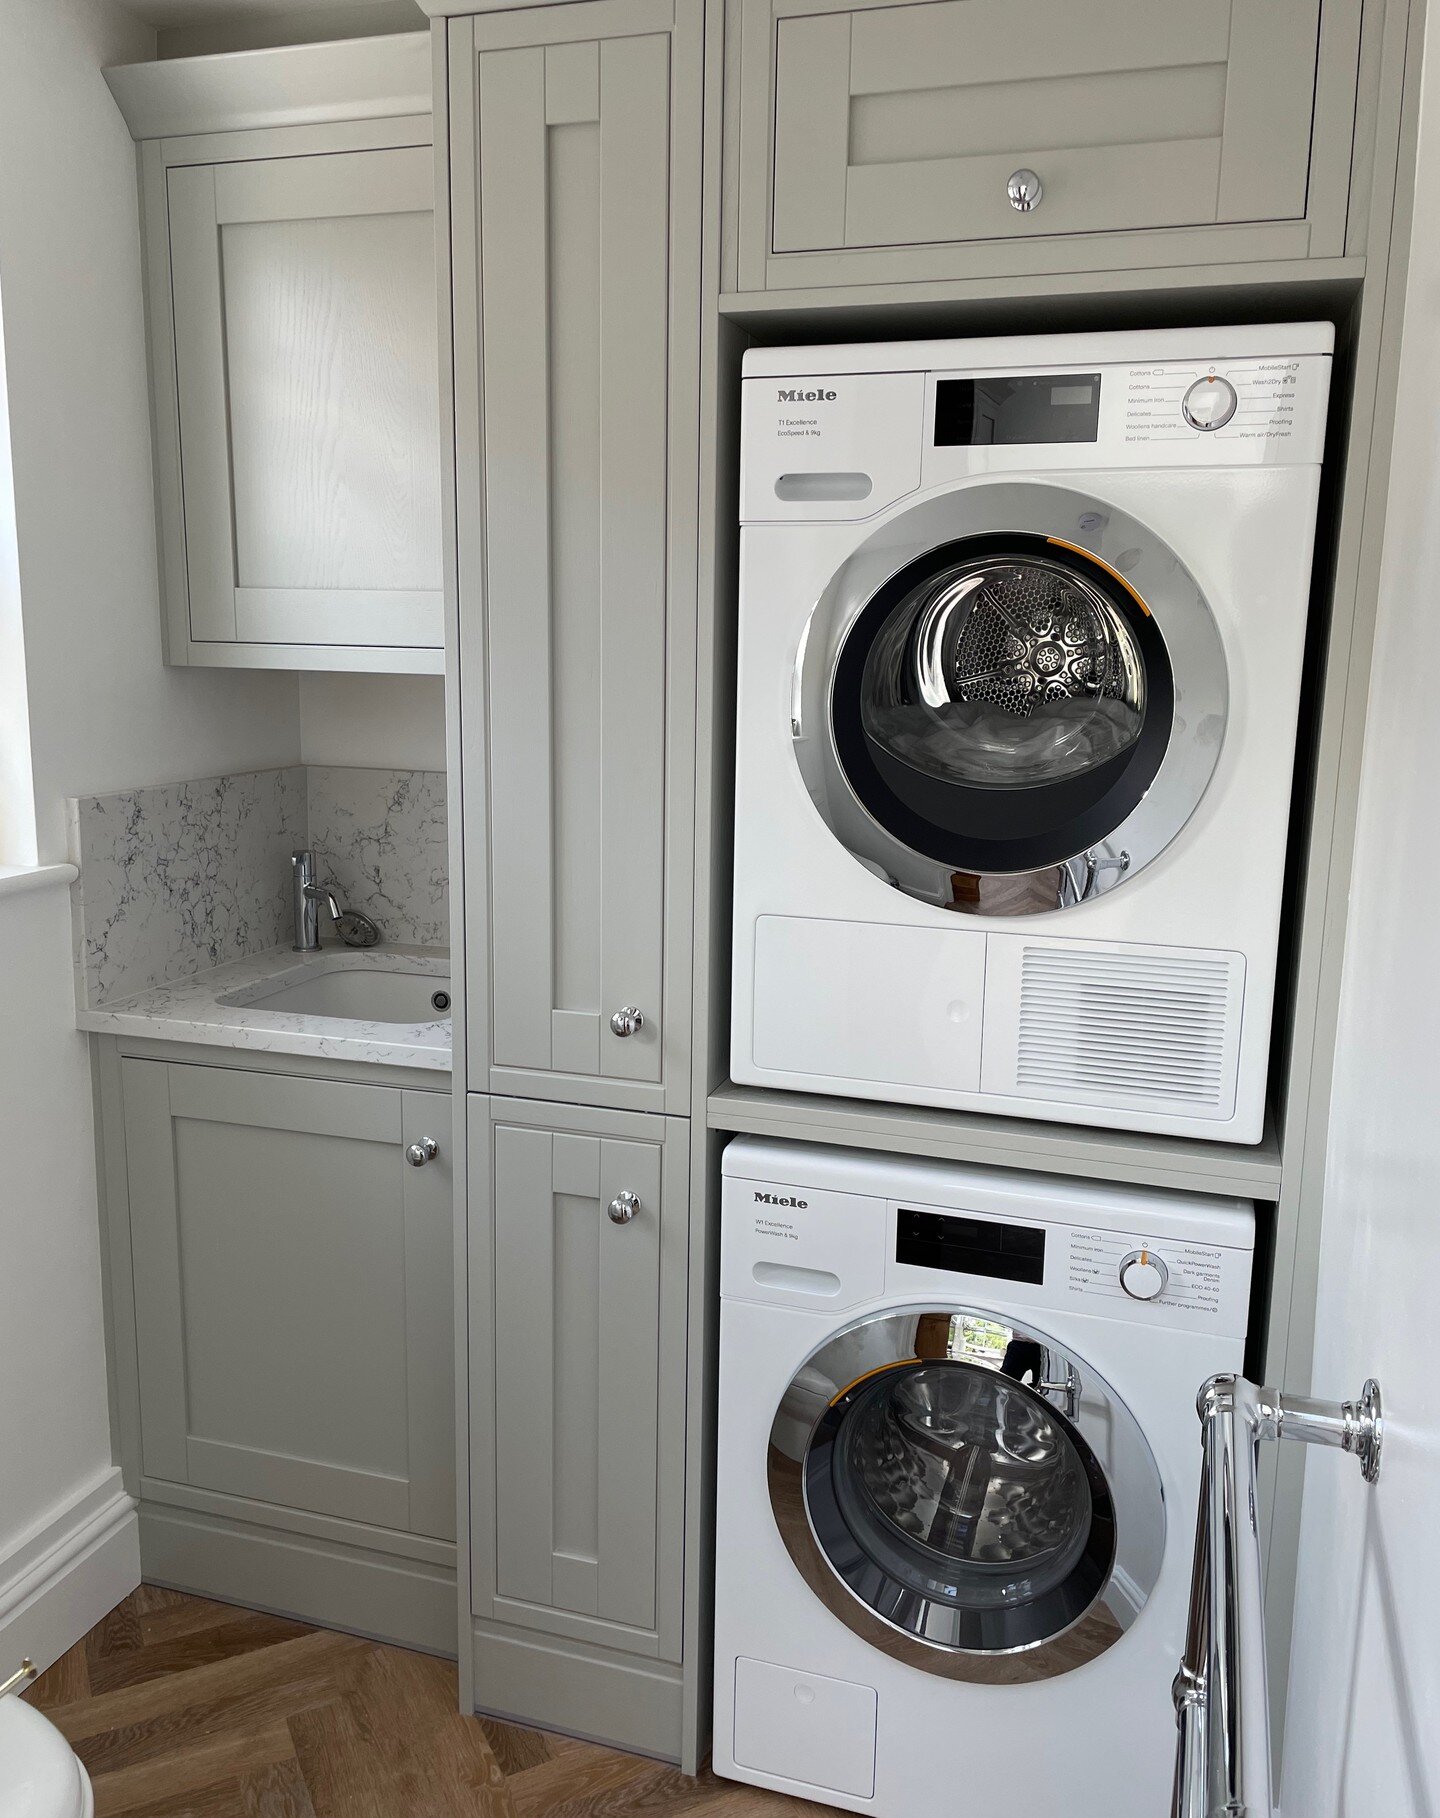 Stacking your Washing Machine and Dryer can help to make the most of the available space, while maintaining a stylish look.

This recently completed Laura Ashley Utility Room contains the latest @miele_gb laundry appliances, including the WEG 365 was